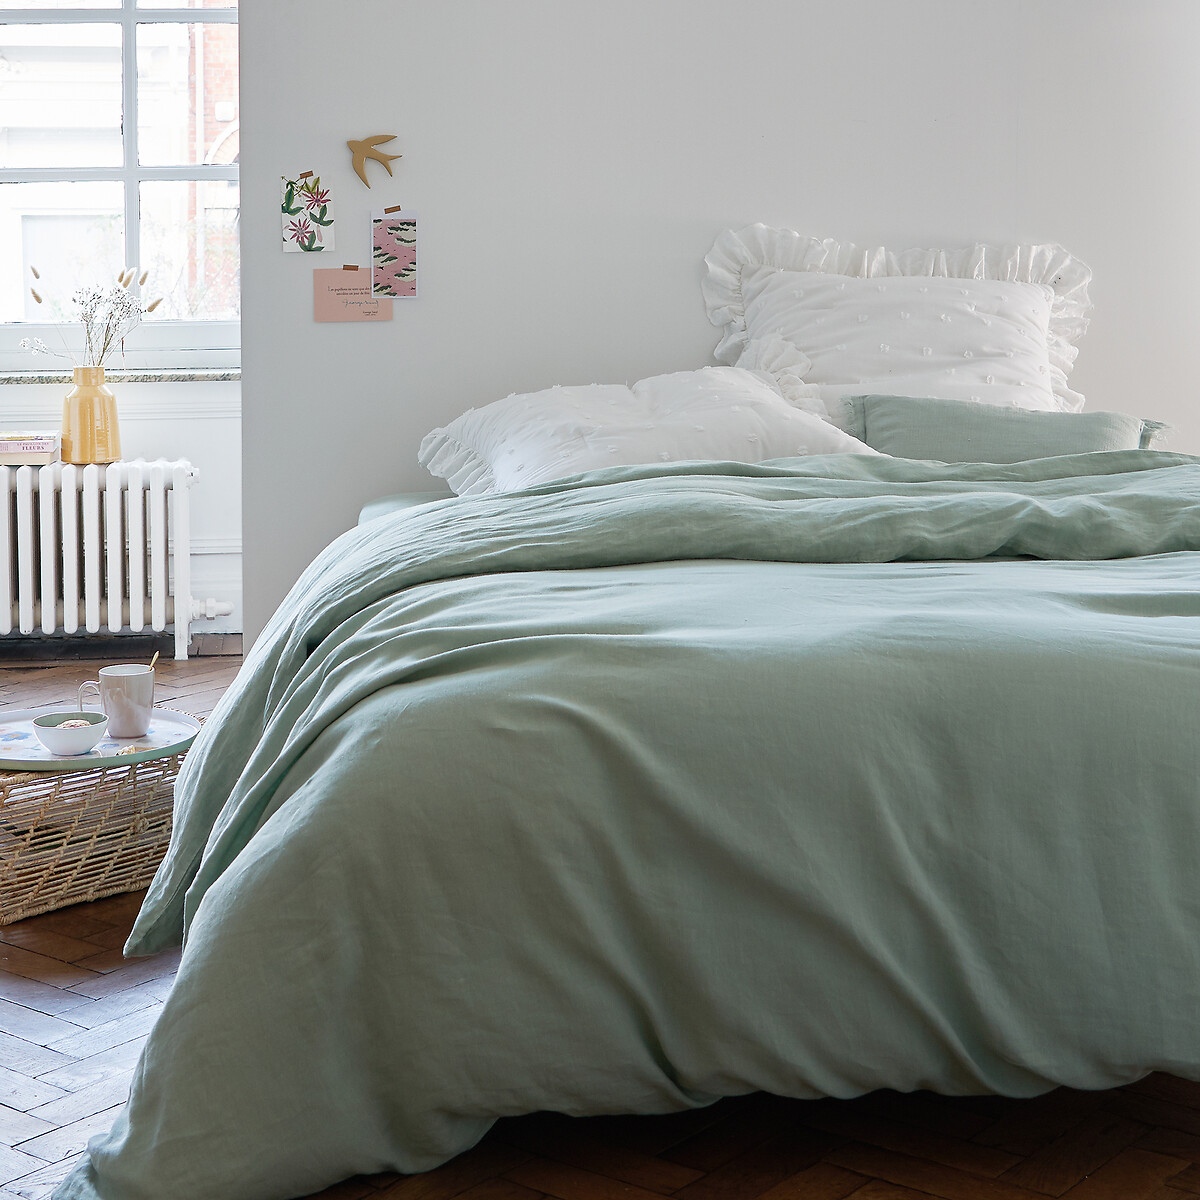 Washed Linen Duvet Cover La Redoute, What Size Duvet For 90 X 200 Bed